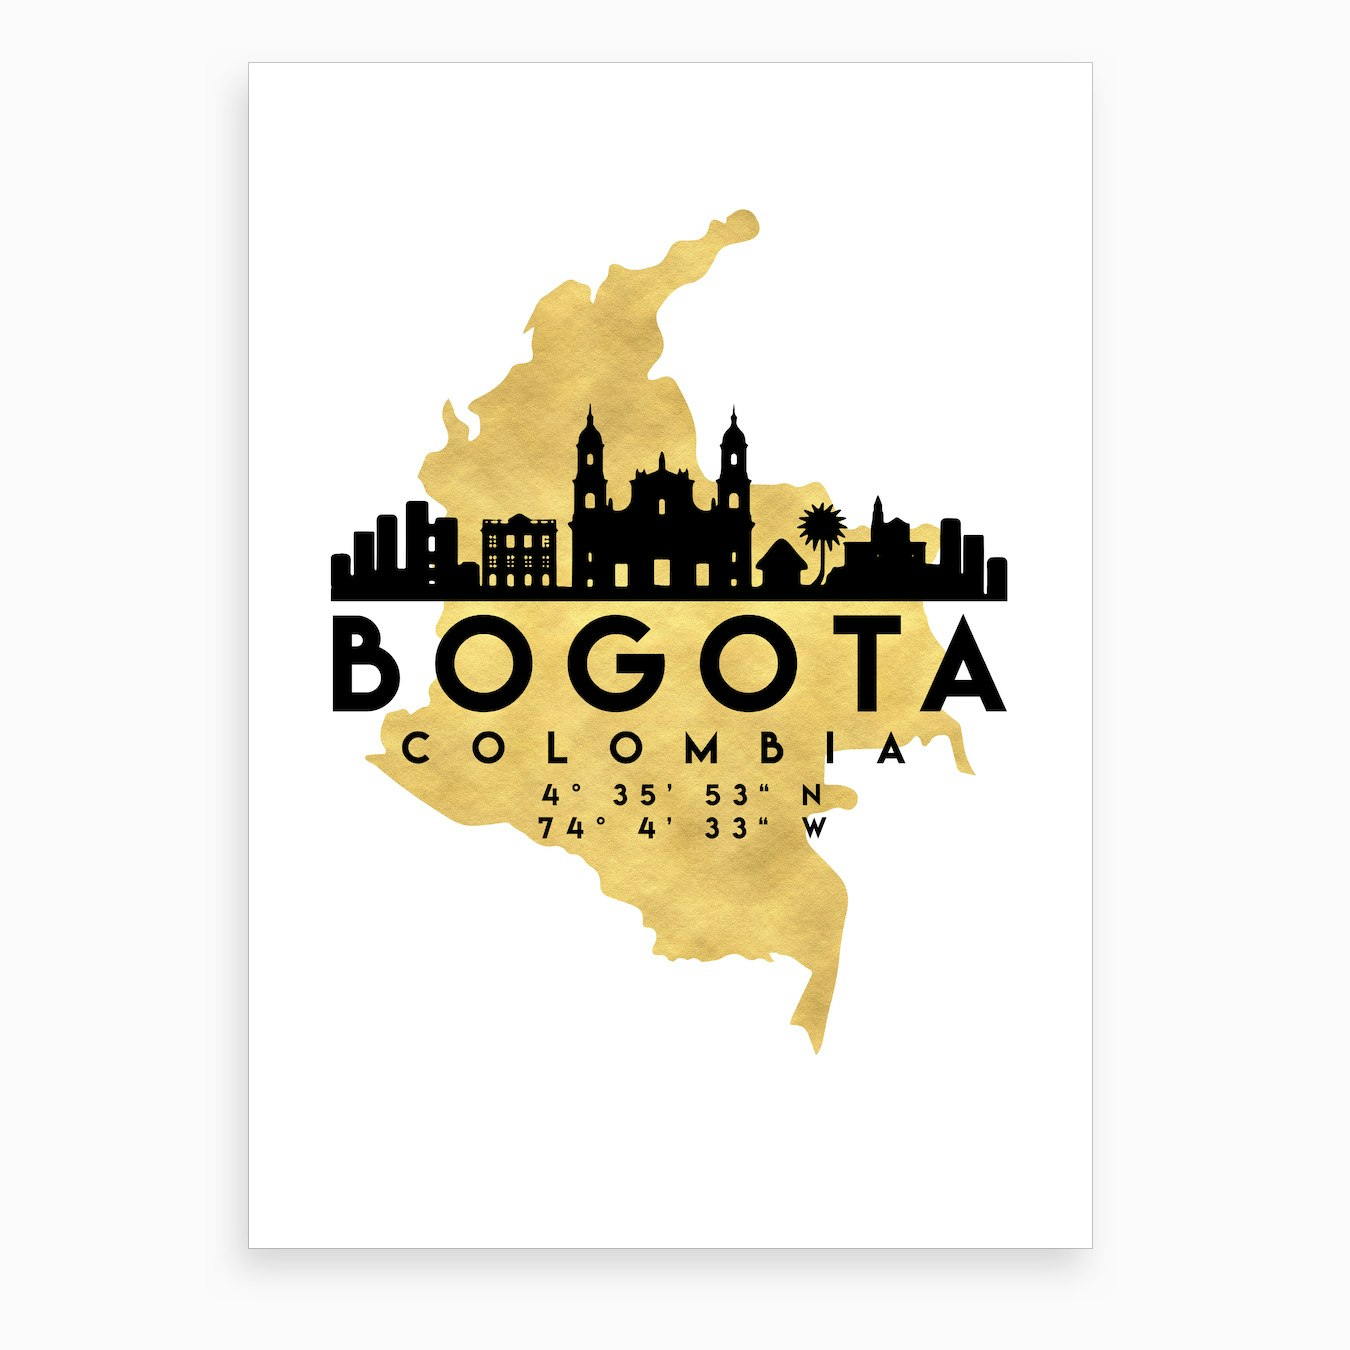 Bogota Colombia Silhouette City Skyline Map Art Print By Deificus Fy